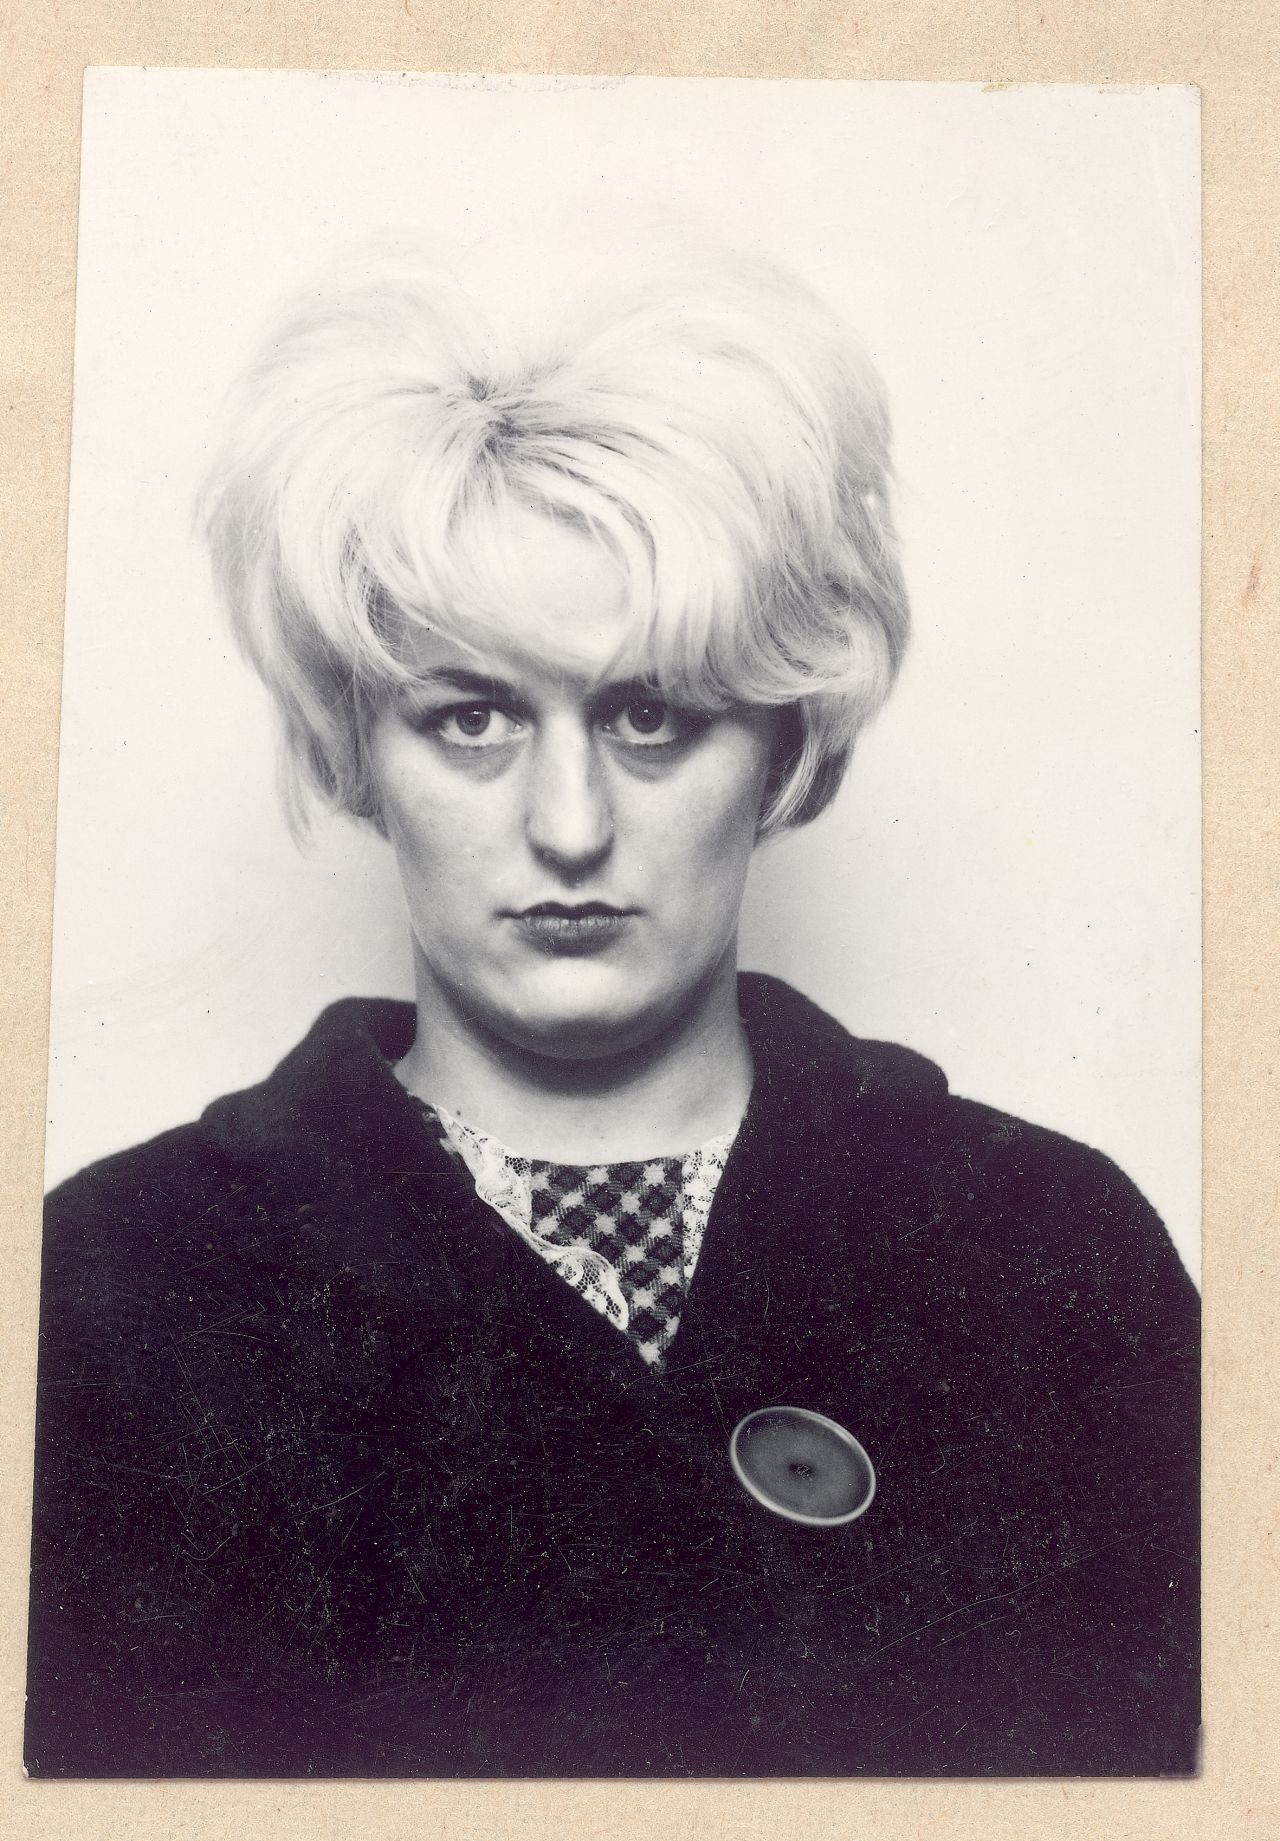 A portrait of Myra Hindley (1942 - 2002) taken during her trial. Hindley was later convicted for the murders of 17-year-old Edward Evans and 10-year-old Lesley Ann Downey.